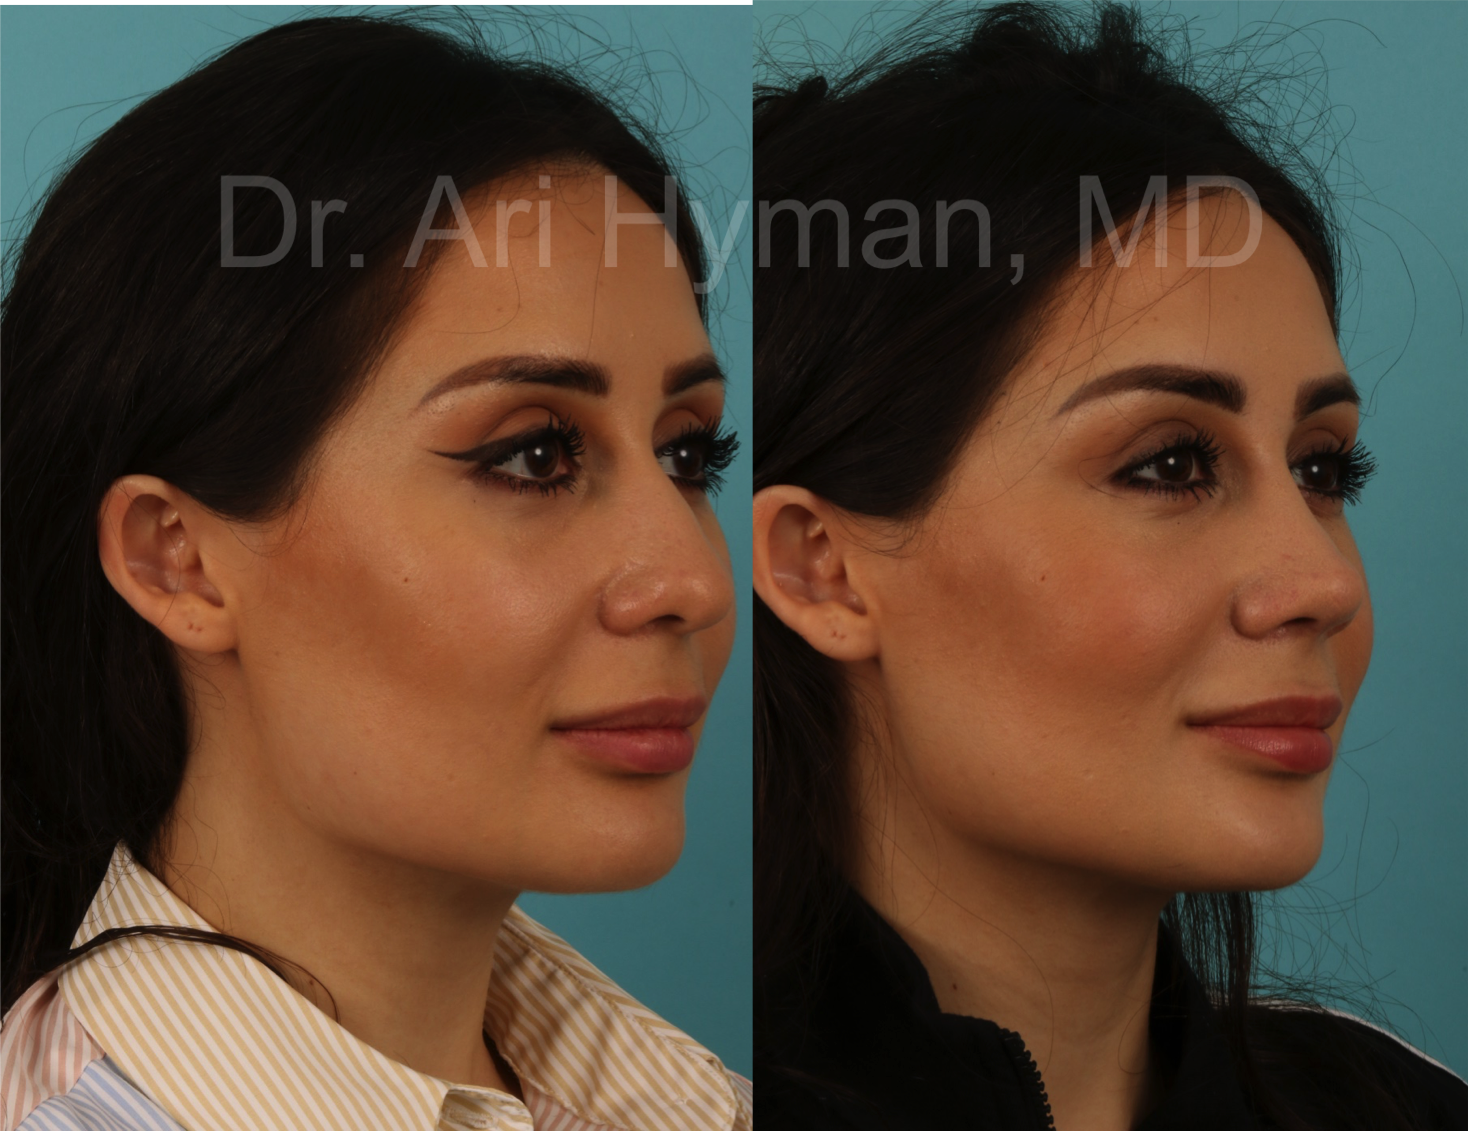 before and after view of woman's nose for rhinoplasty procedure